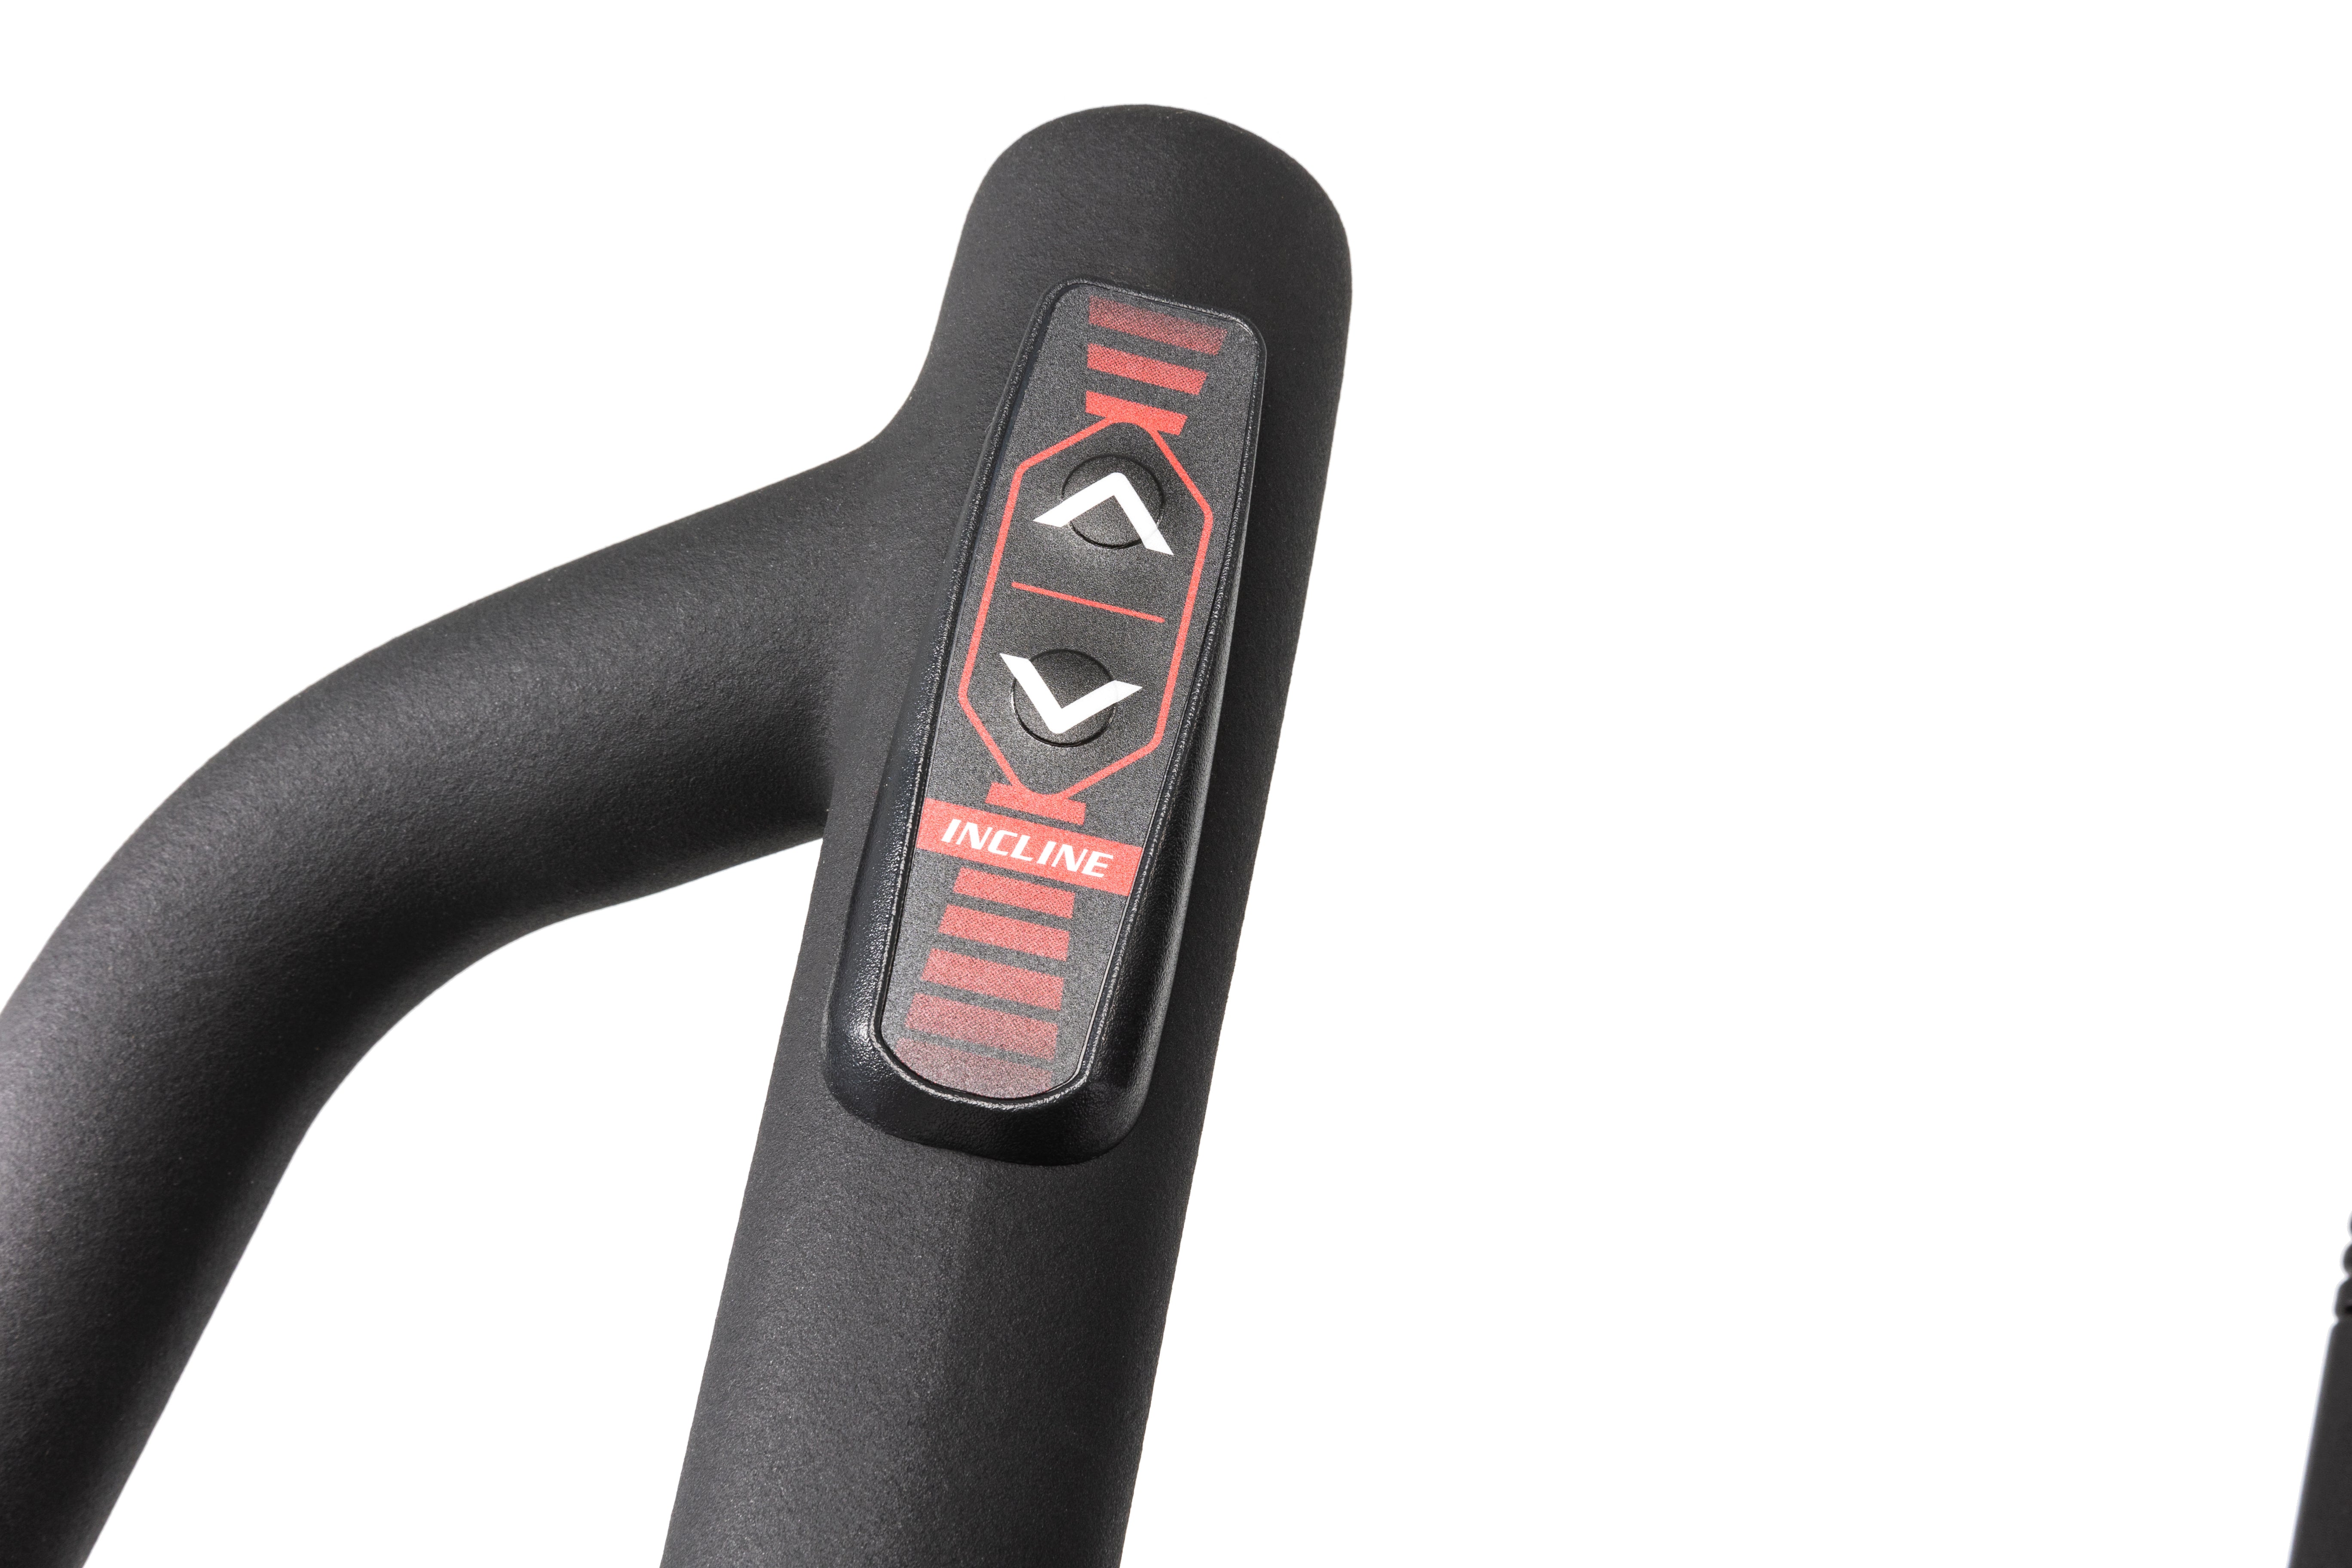 Close-up of the Sole E95S elliptical machine's handle, showcasing the "INCLINE" adjustment button with up and down arrows on a sleek black grip.